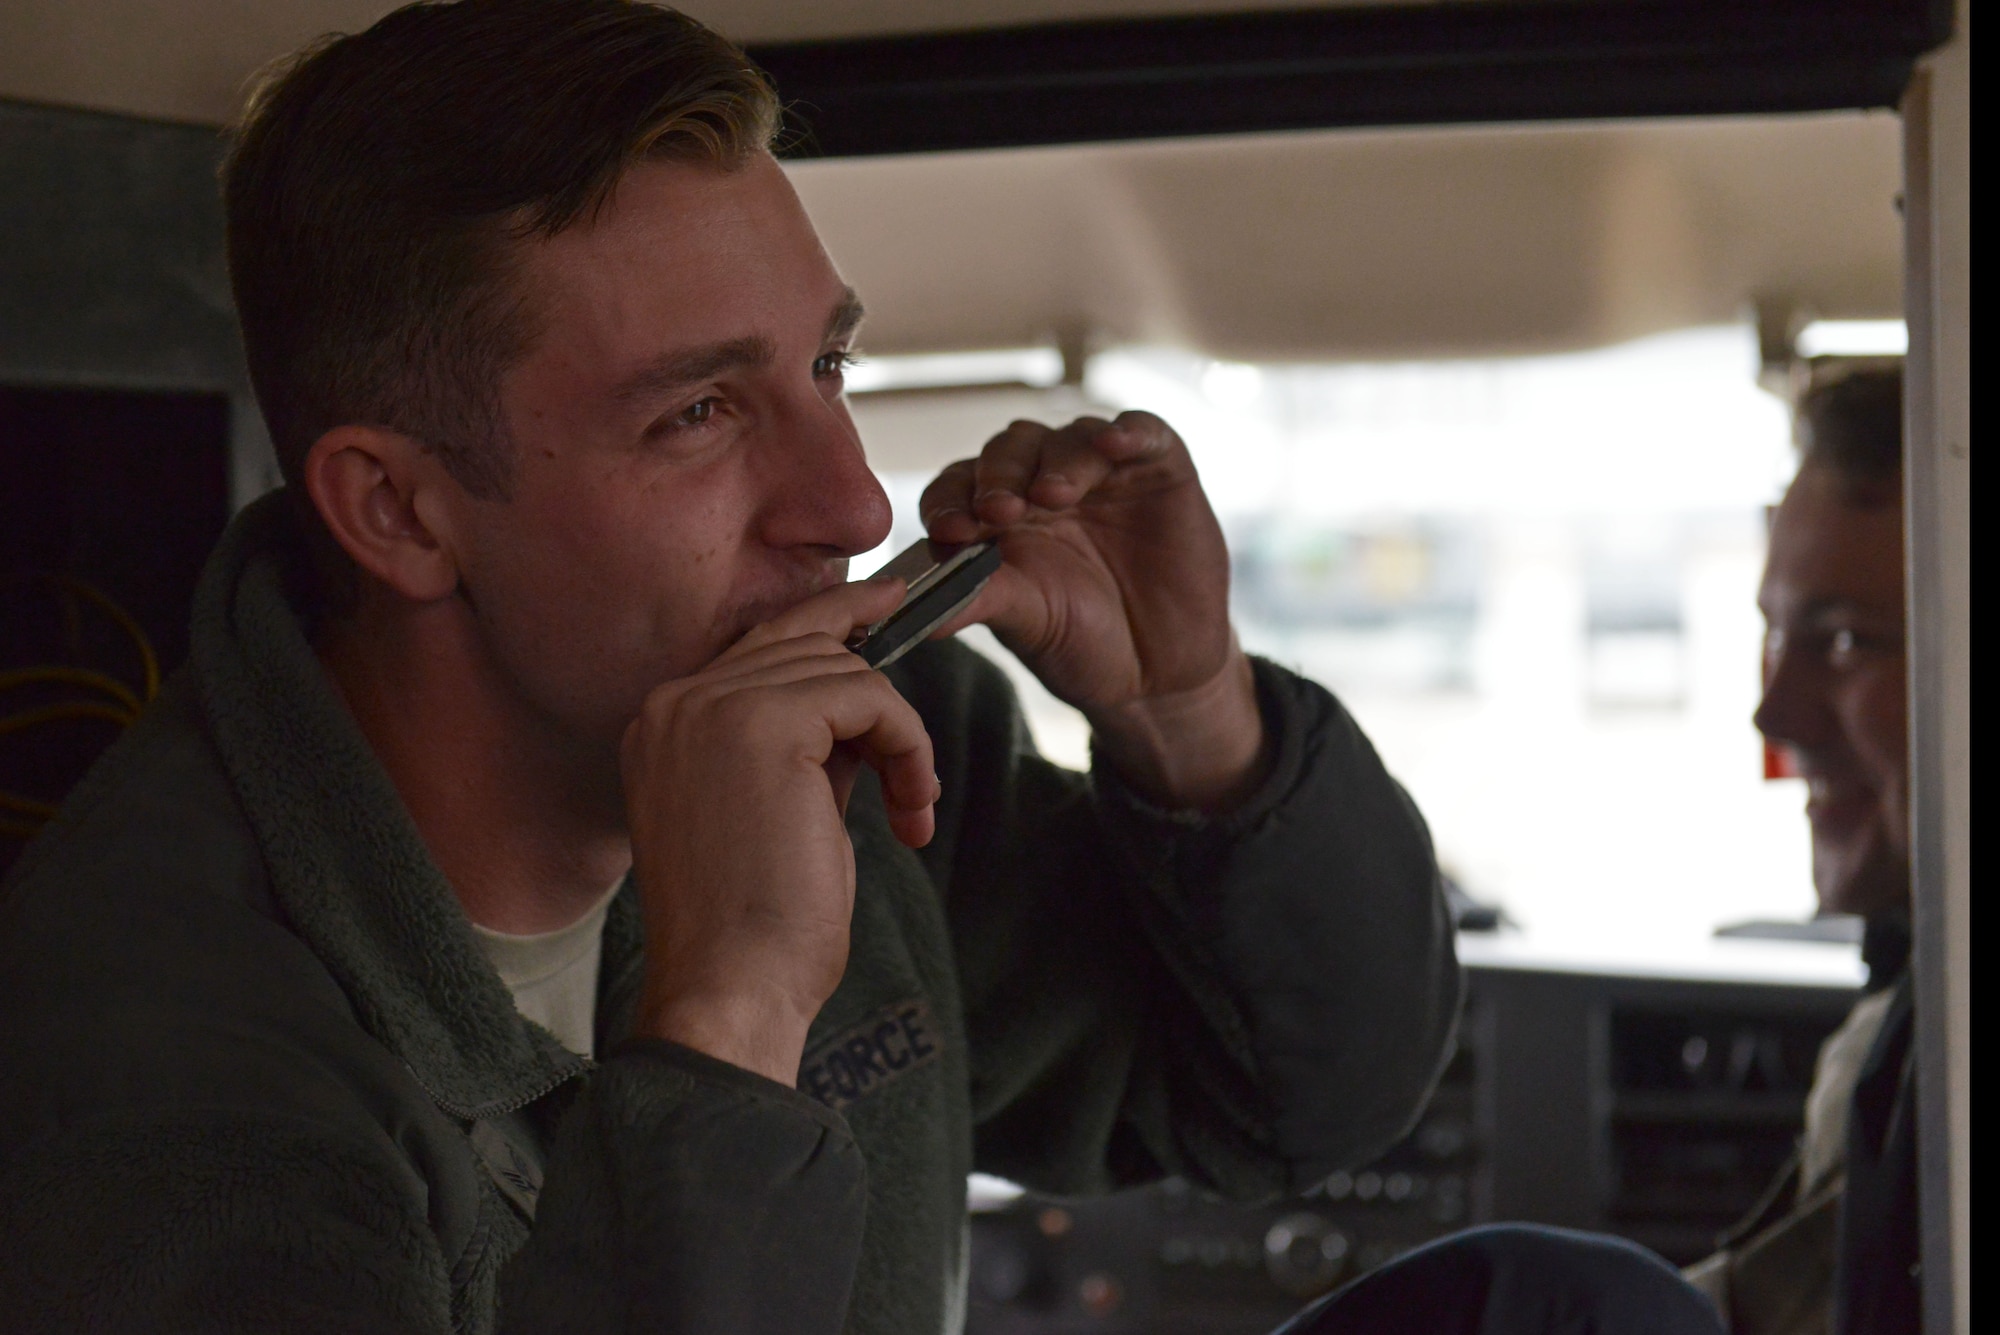 U.S. Air Force Senior Airman Zachary Jung, 20th Aircraft Maintenance Squadron tactical aircraft maintainer, plays the harmonica while in an expediter truck at Shaw Air Force Base, S.C., Dec. 13, 2016. Expediter trucks, also known as “bread trucks”, are commonly used to transport Airmen to various locations on the flightline. (U.S. Air Force photo by Airman 1st Class Destinee Sweeney)